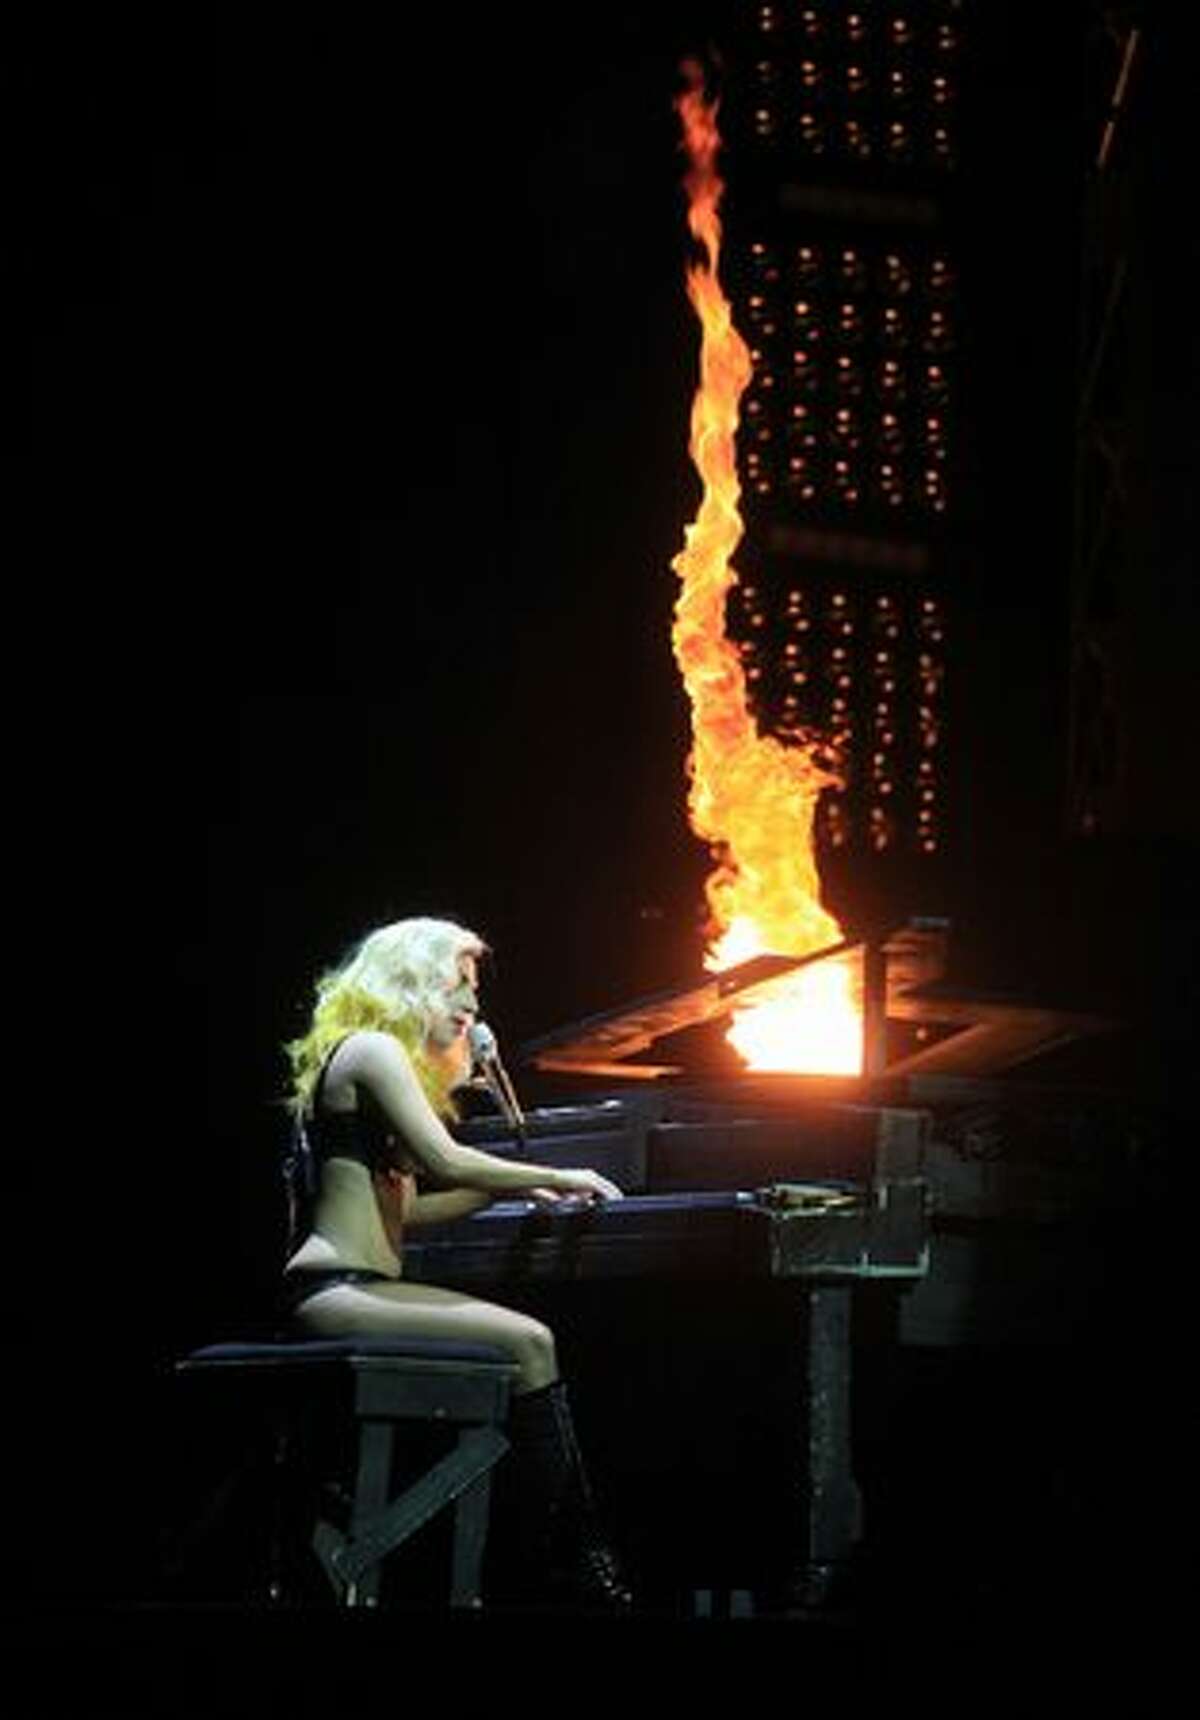 Lady Gaga performs her song Speechless during a show at the Tacoma Dome on Saturday August 21, 2010.